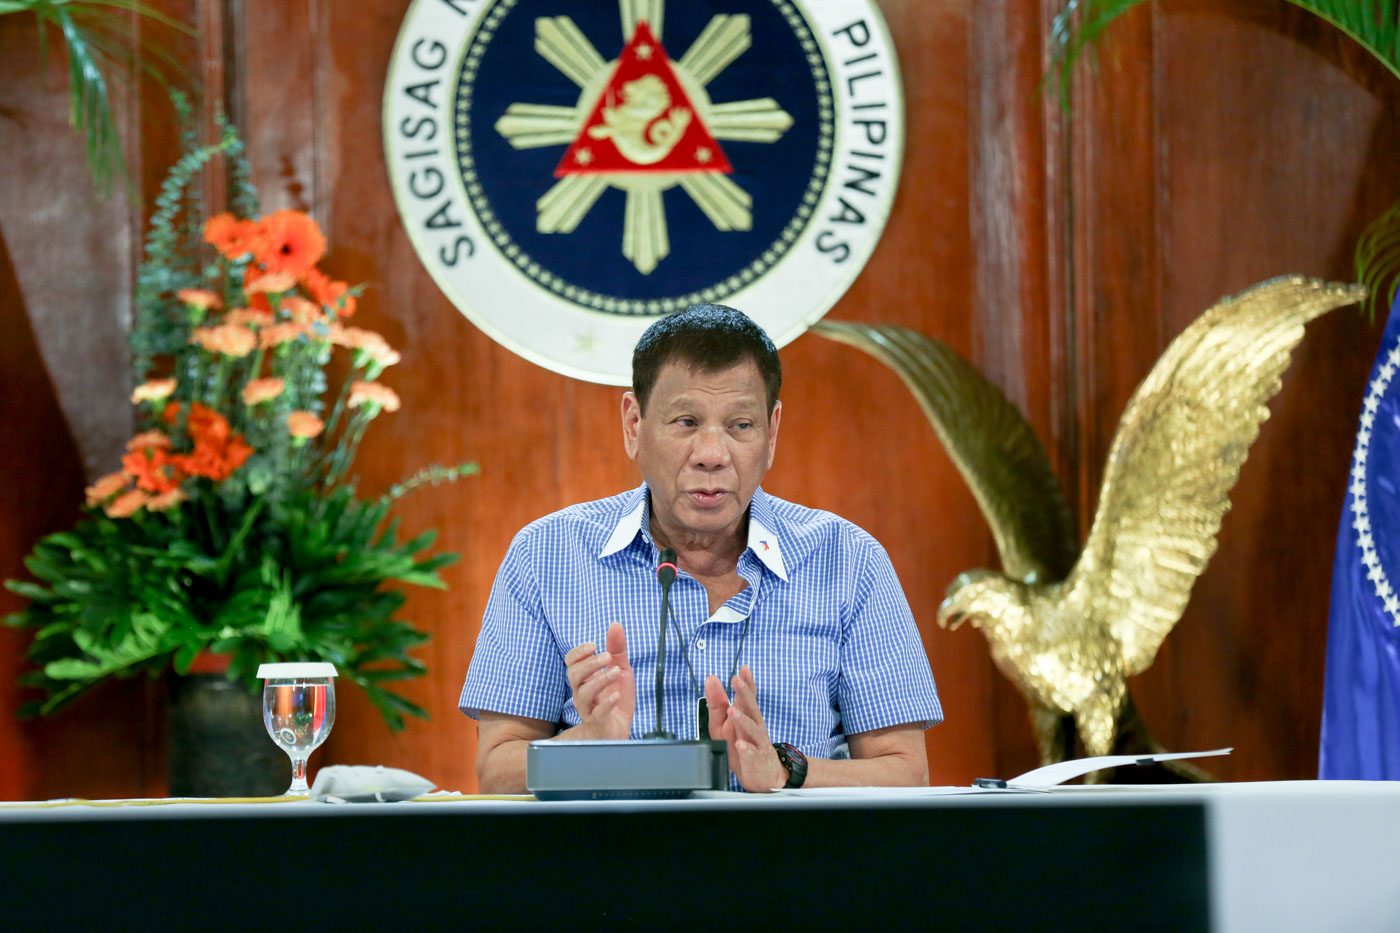 Duterte to present COVID-19 recovery plan during SONA 2020